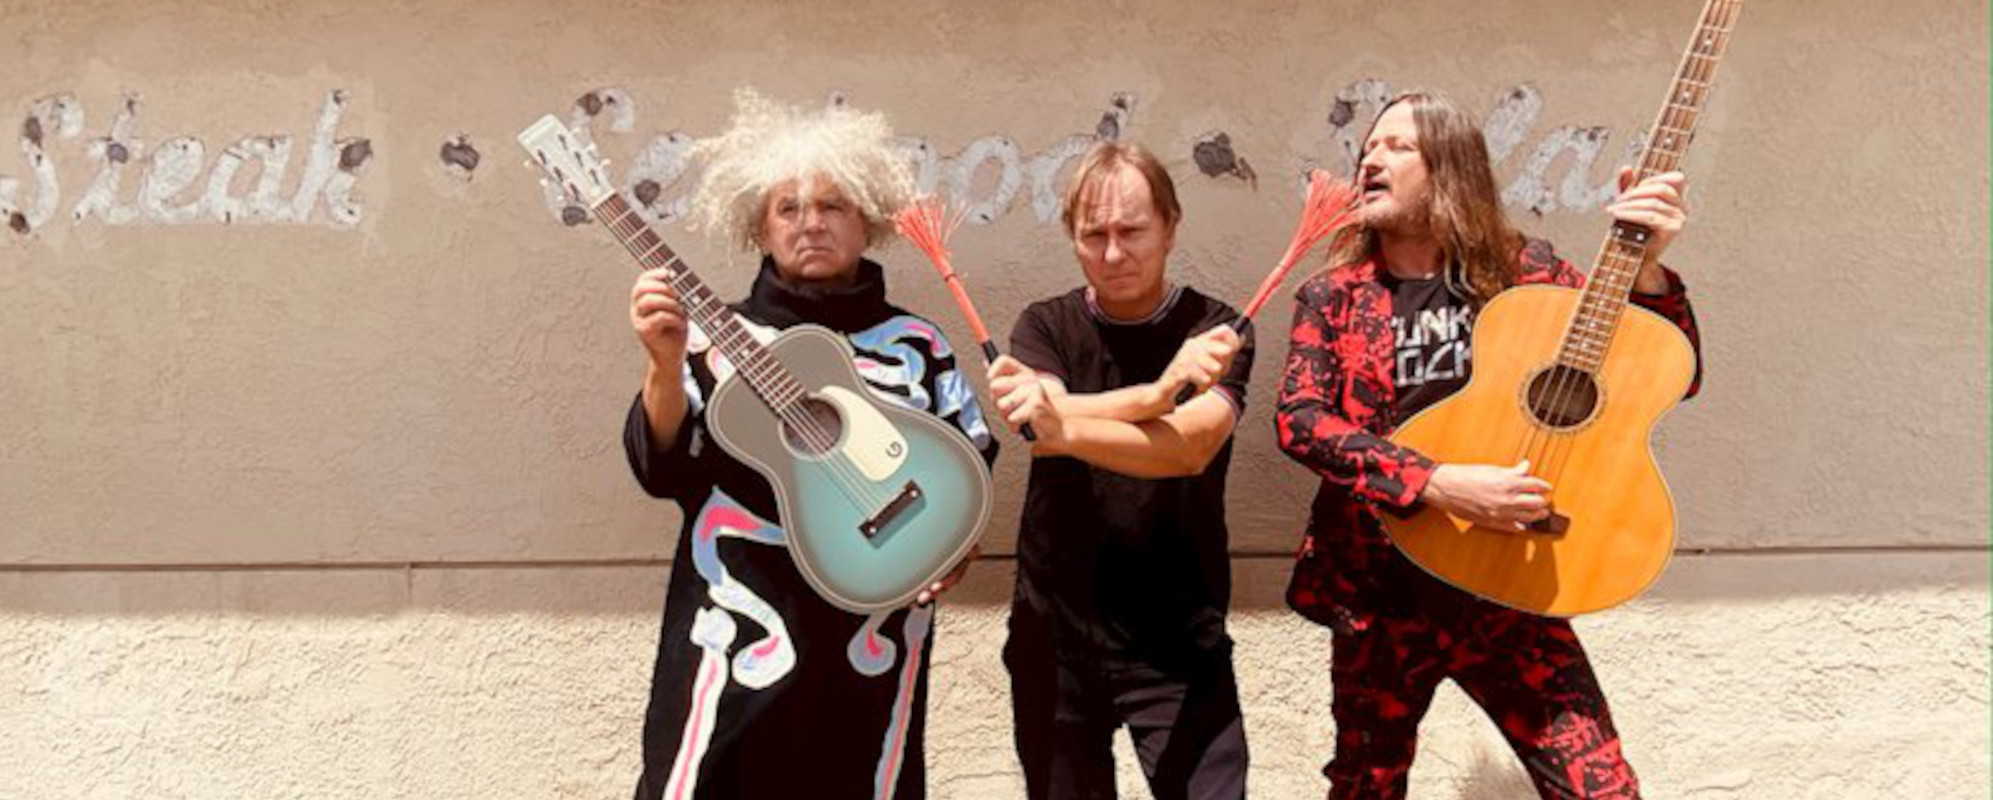 Melvins’ Frontman Buzz Osborne Talks Importance of Listening Ahead of 36-Song Acoustic Collection Release